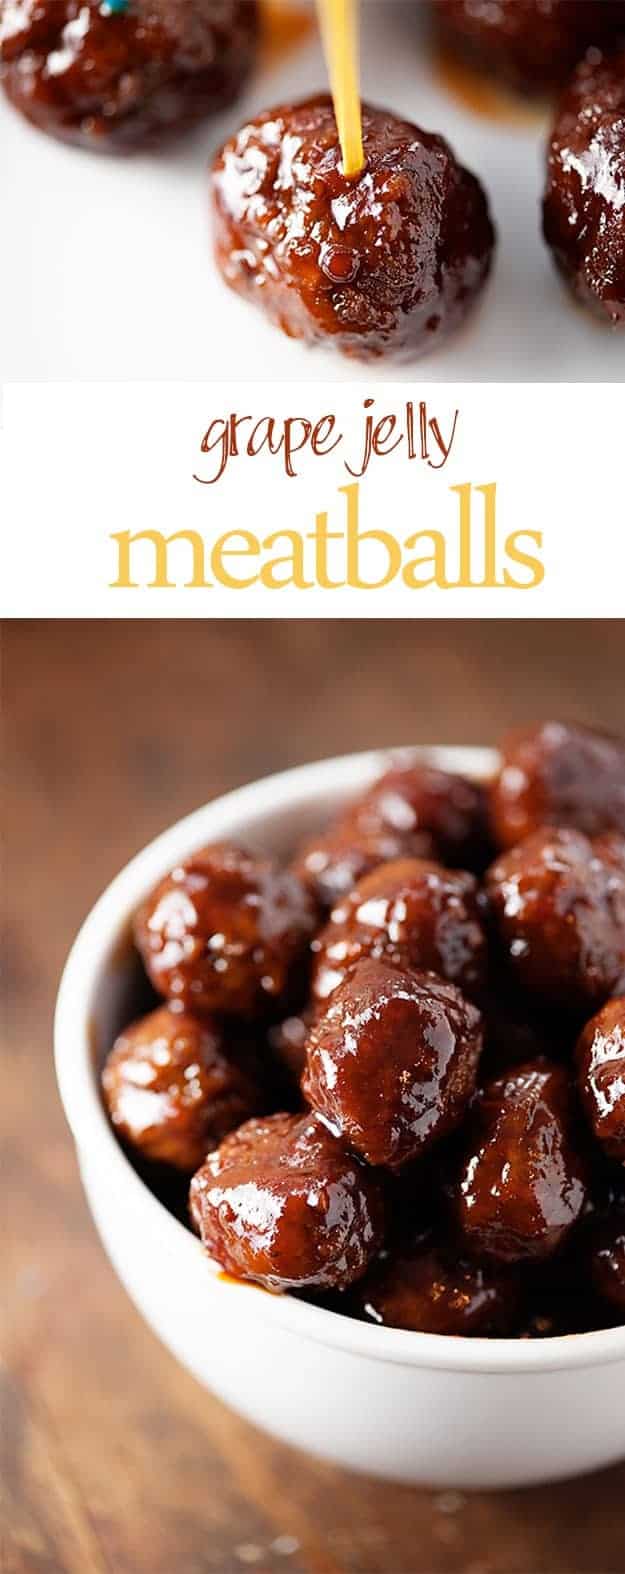 These grape jelly meatballs are the simplest appetizer to make!